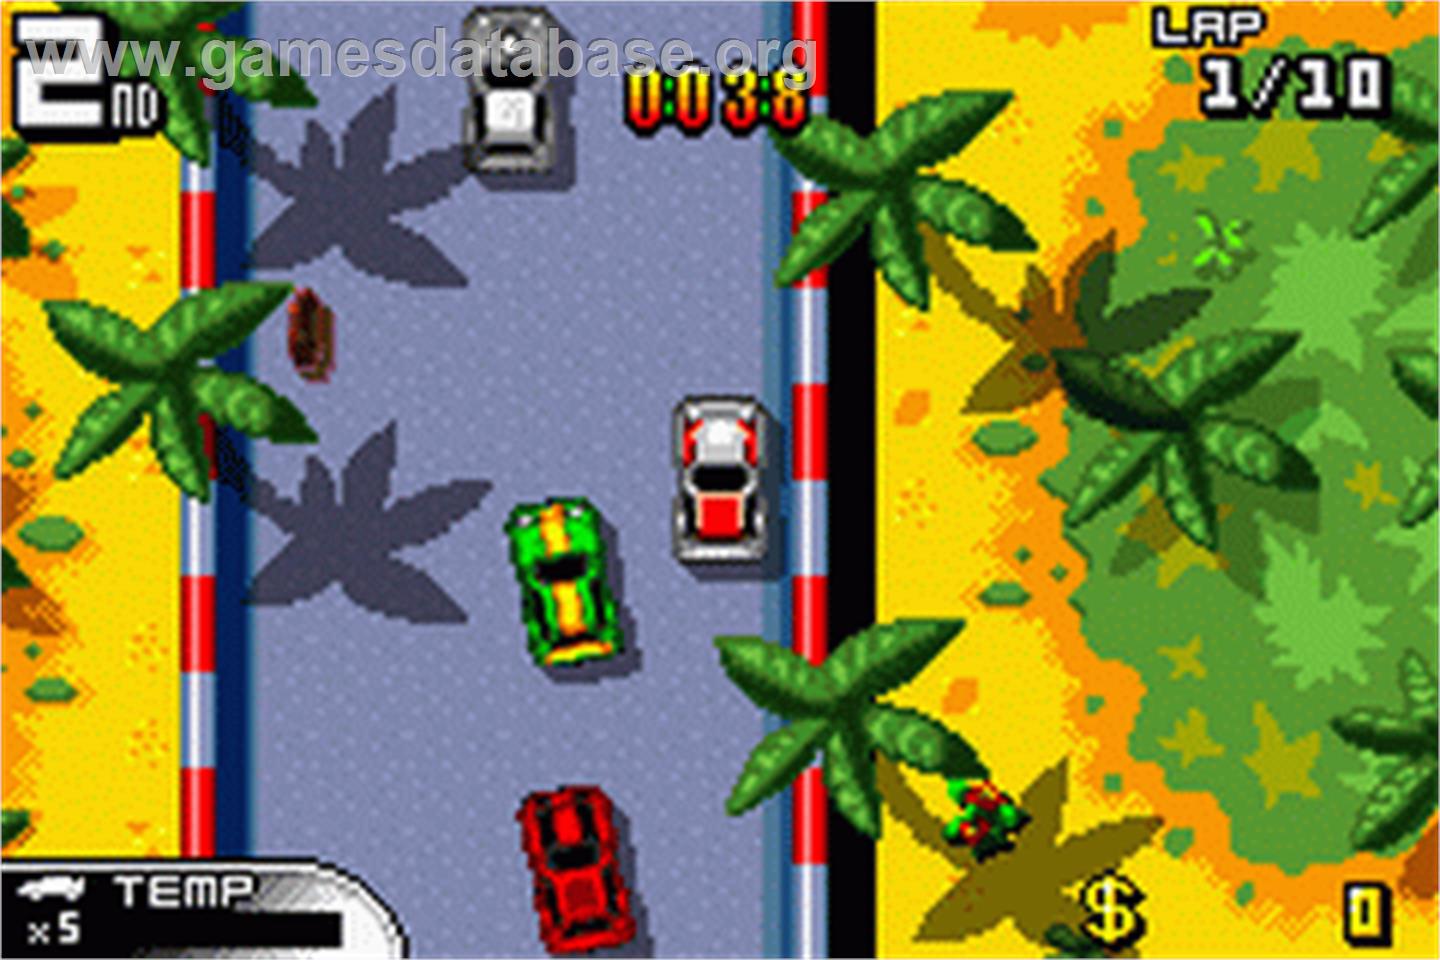 Demon Driver: Time to Burn Rubber - Nintendo Game Boy Advance - Artwork - In Game